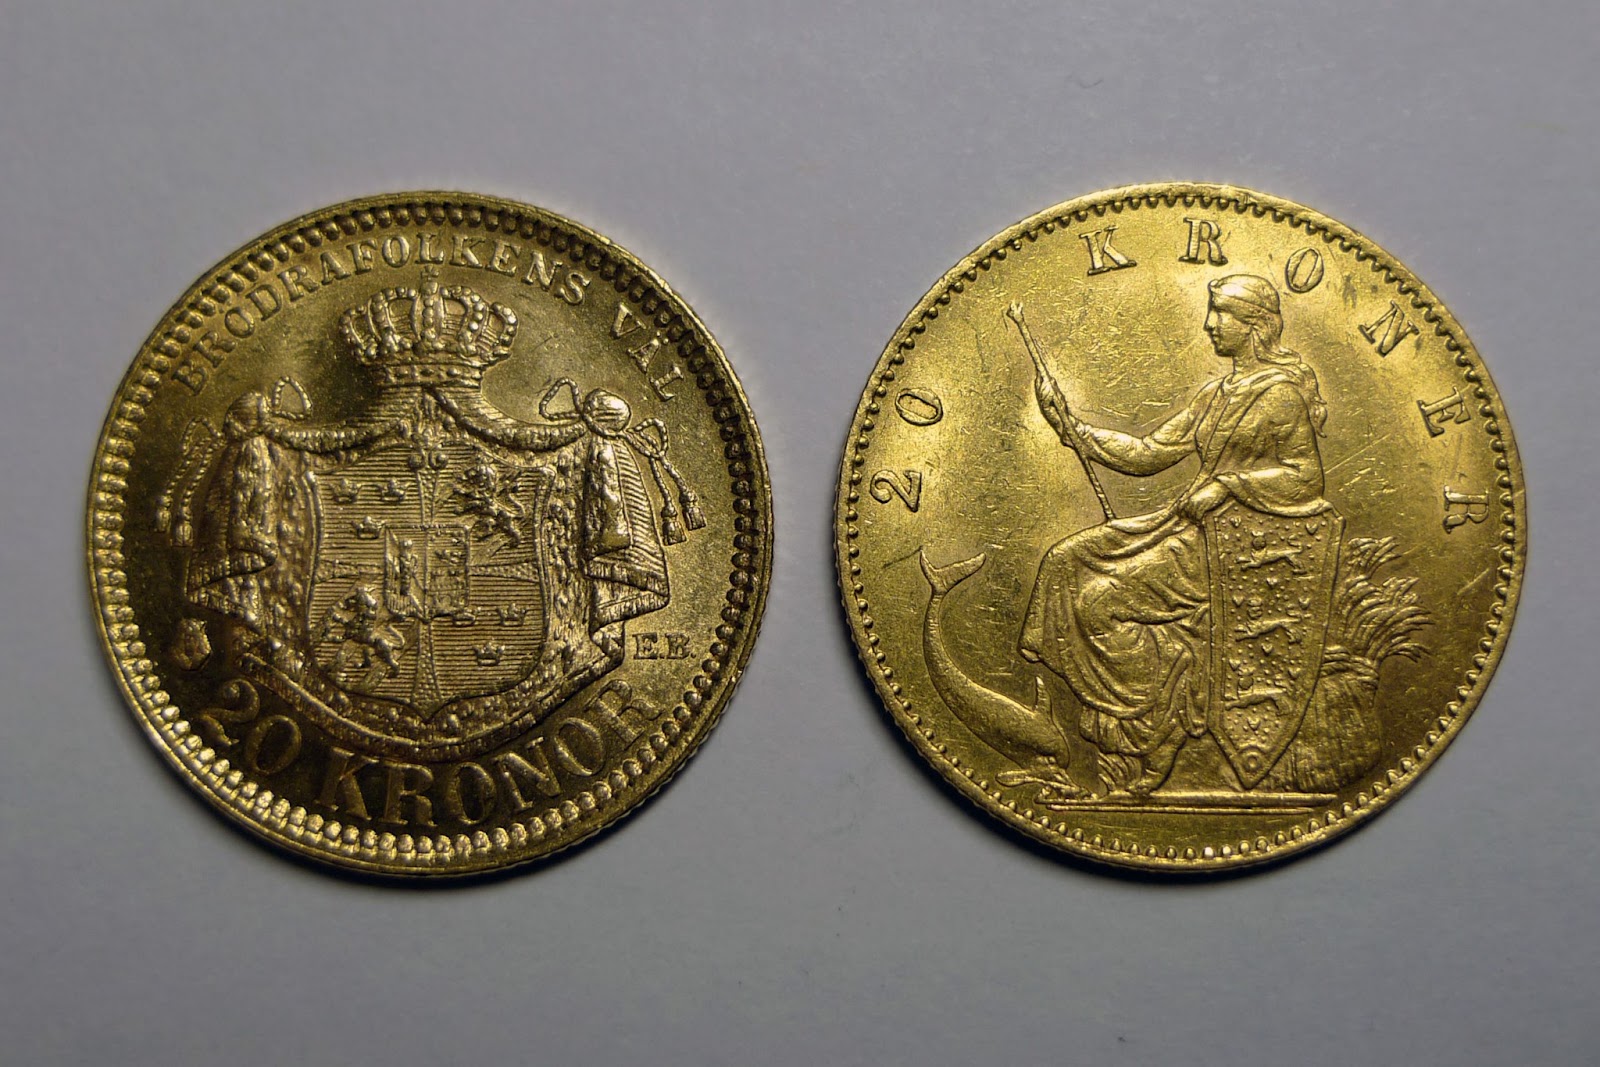 Two golden 20 kr coins from the Scandinavian Monetary Union, which was based on a gold standard. The coin to the left is Swedish and the right one is Danish.